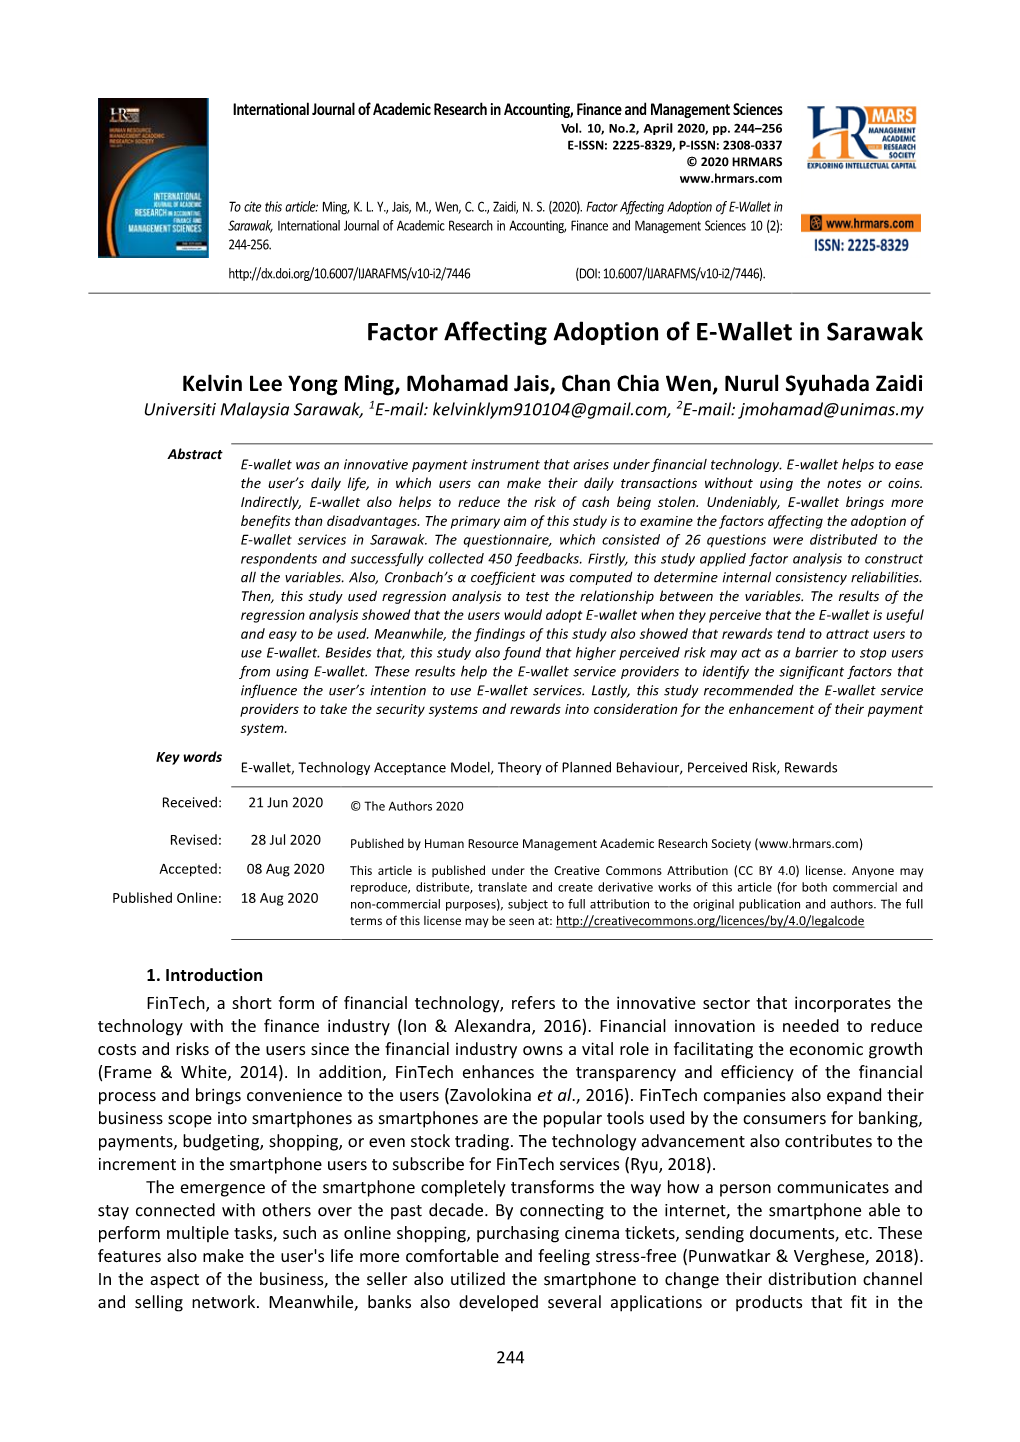 Factor Affecting Adoption of E-Wallet in Sarawak, International Journal of Academic Research in Accounting, Finance and Management Sciences 10 (2): 244-256